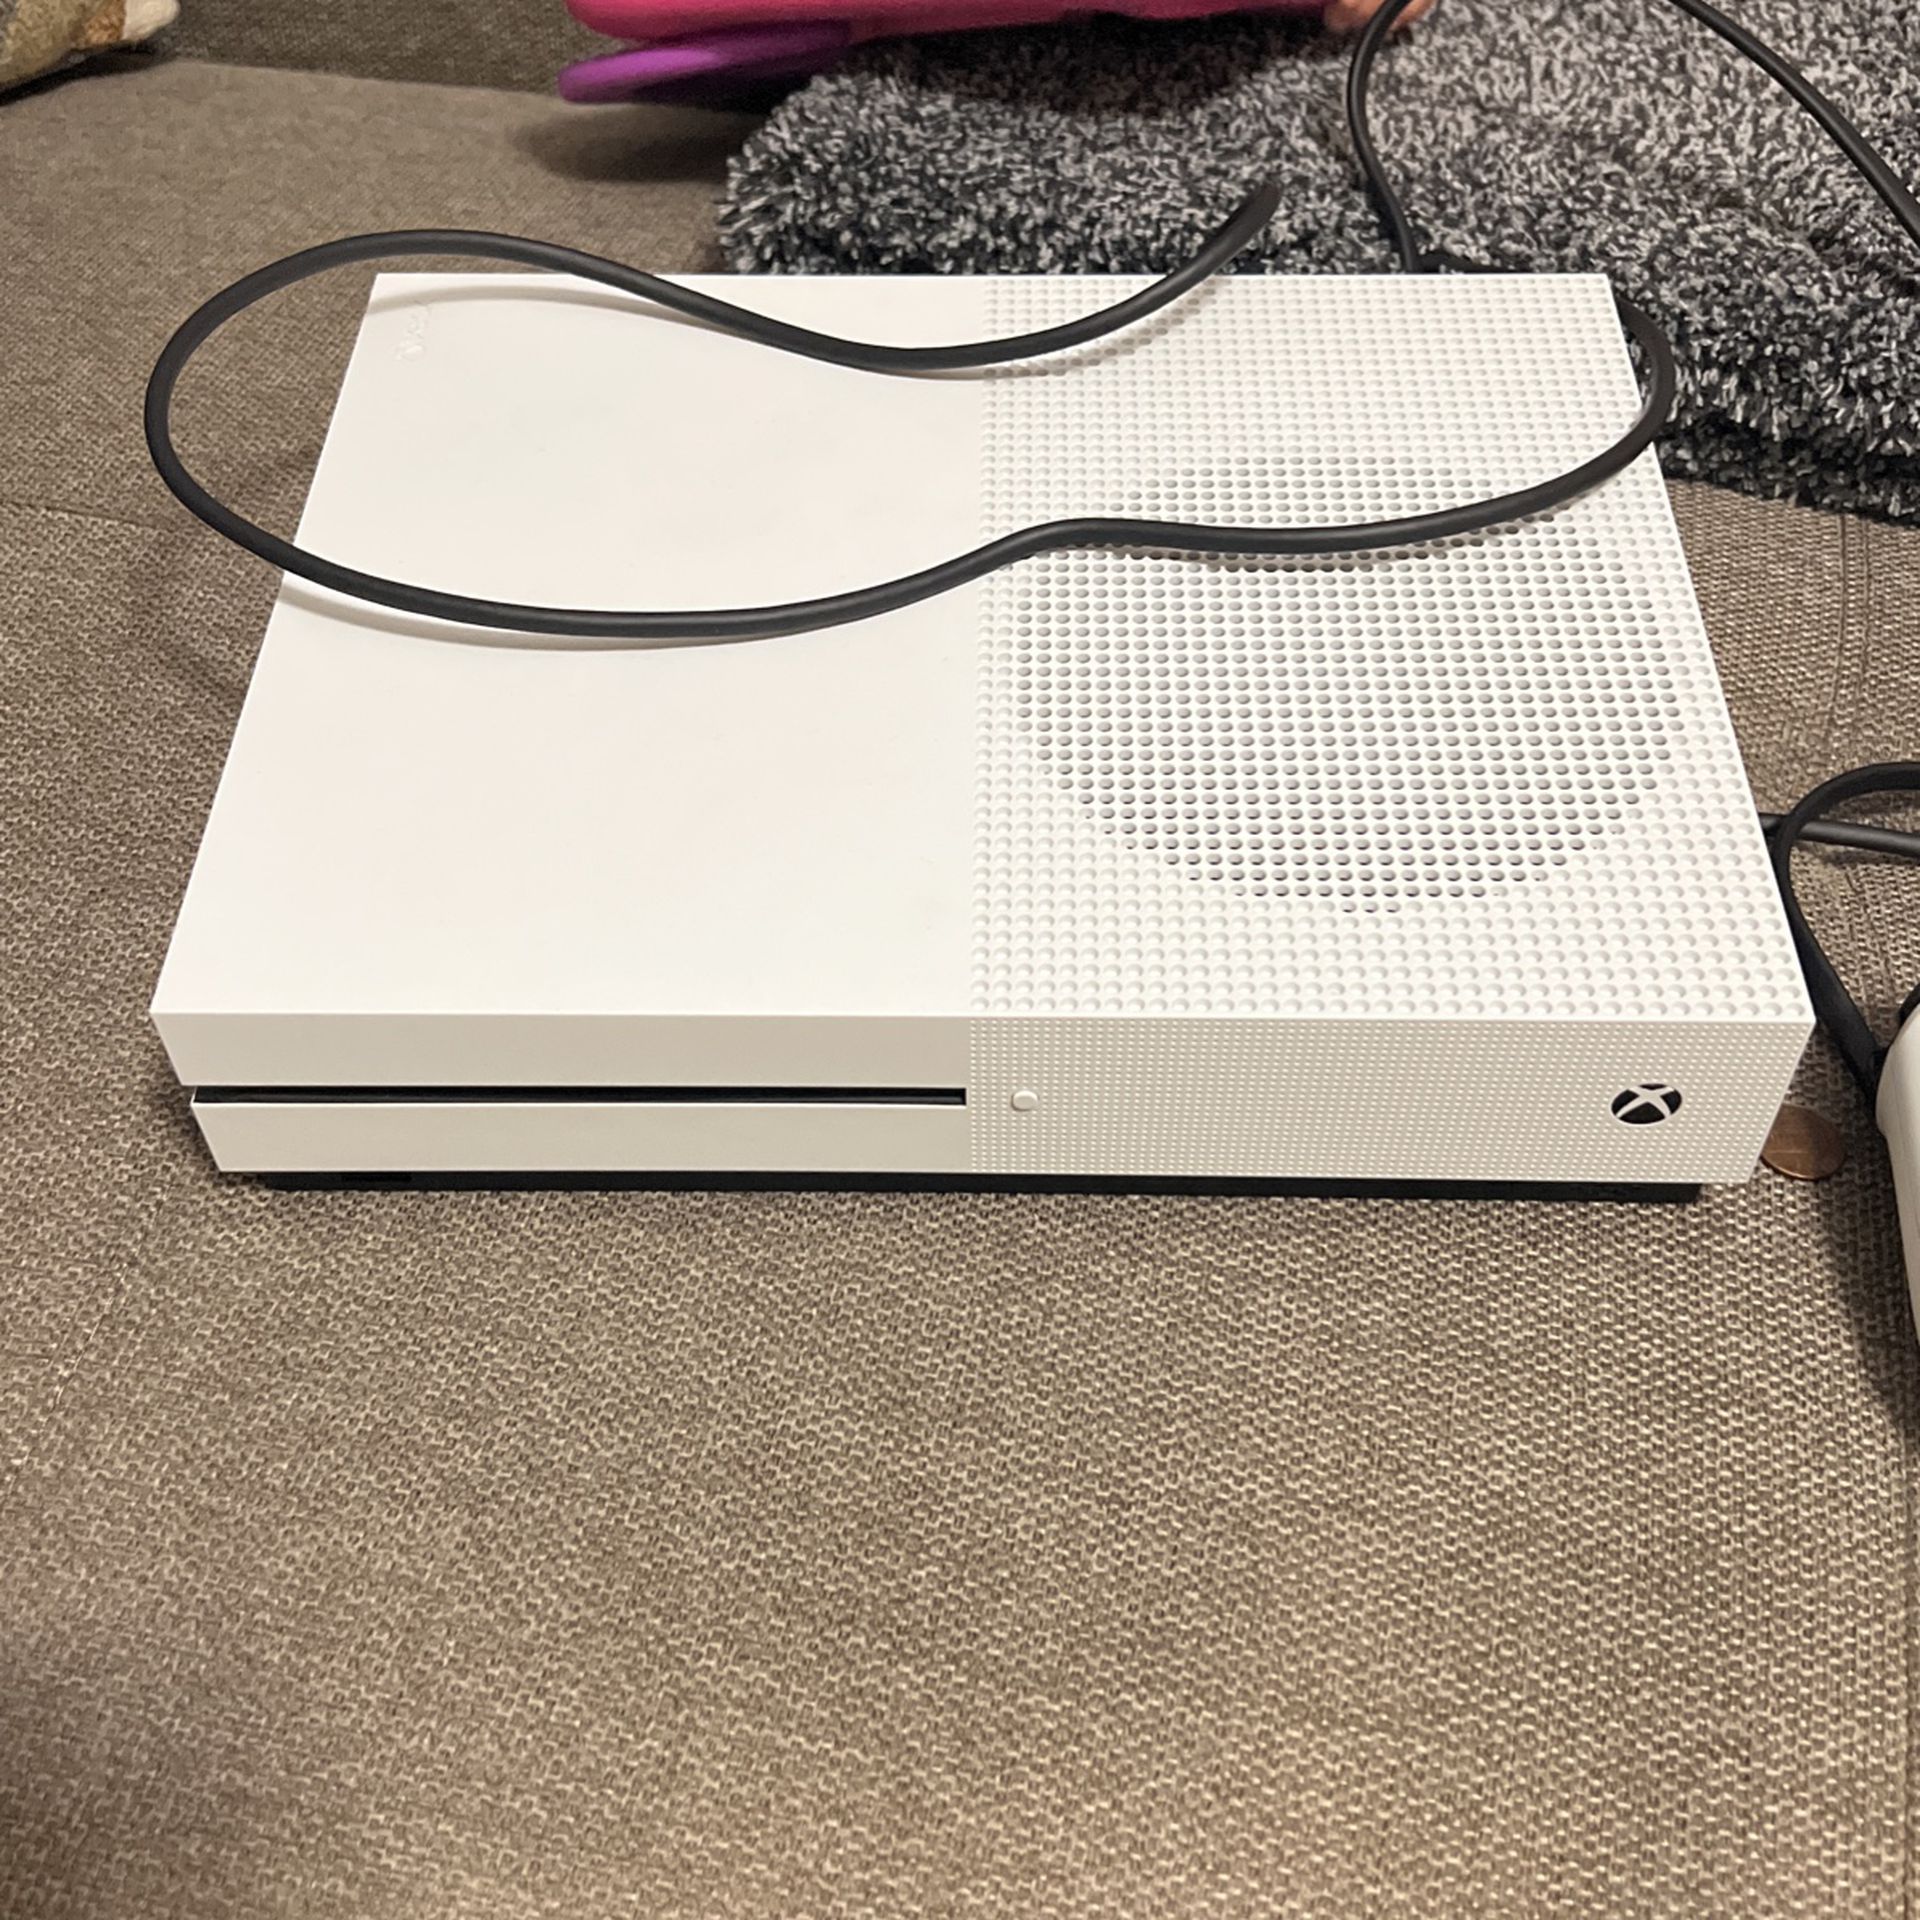 XBox One S W/Controller 